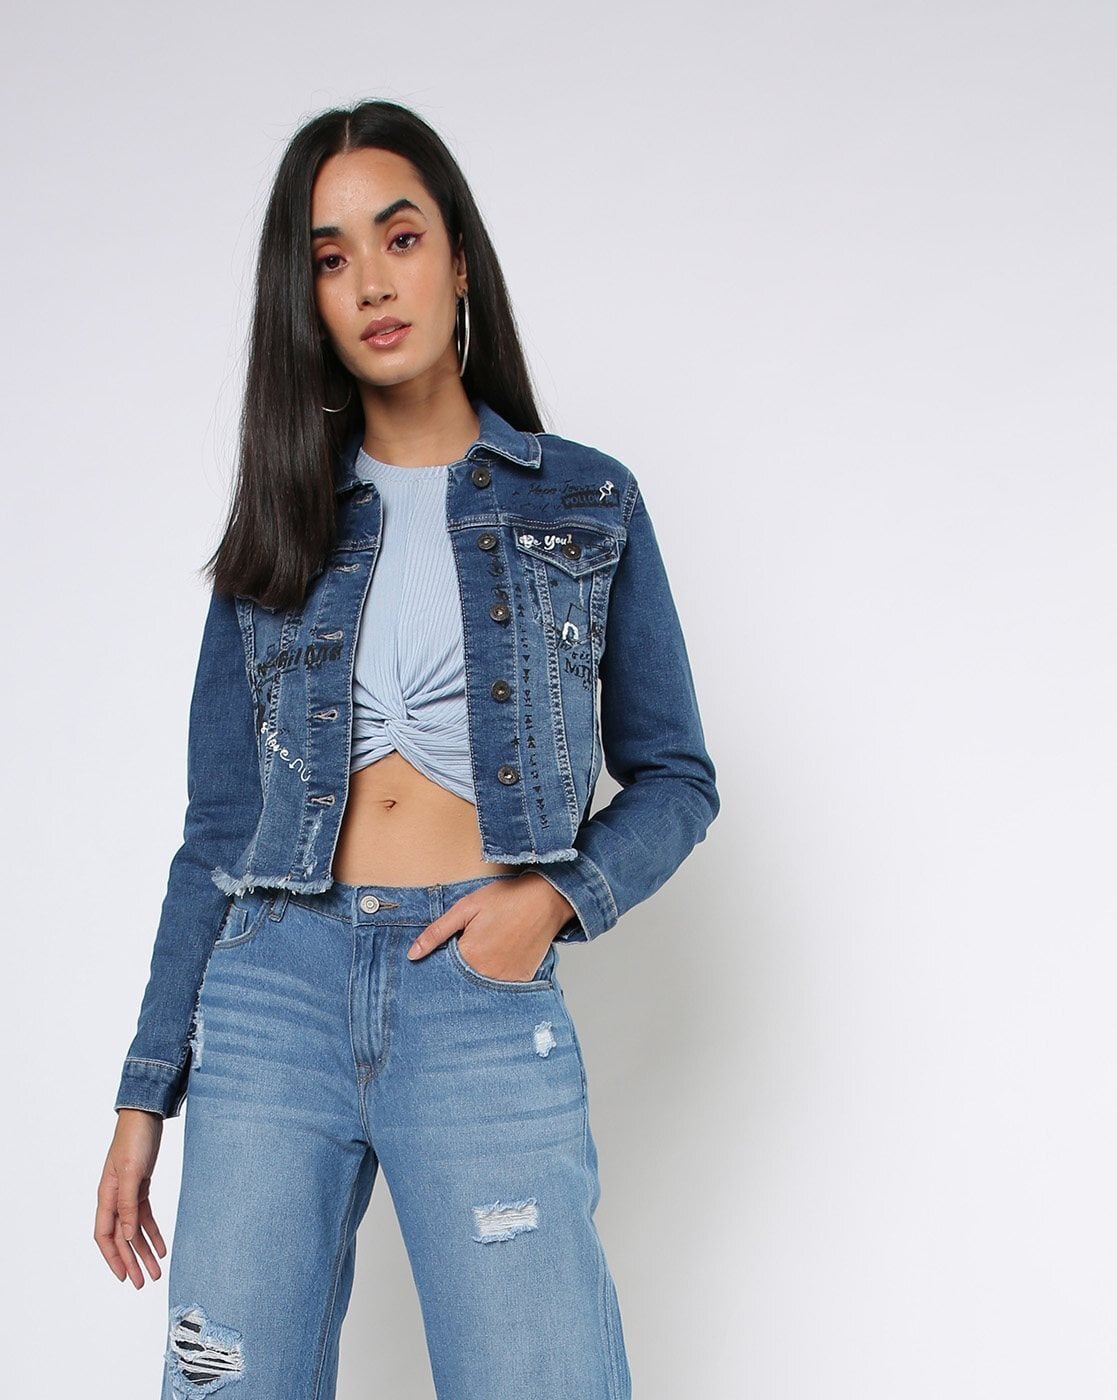 Pepe Jeans London Core Jacket - 39.60 €. Buy Denim jackets from Pepe Jeans  London online at Boozt.com. Fast delivery and easy returns